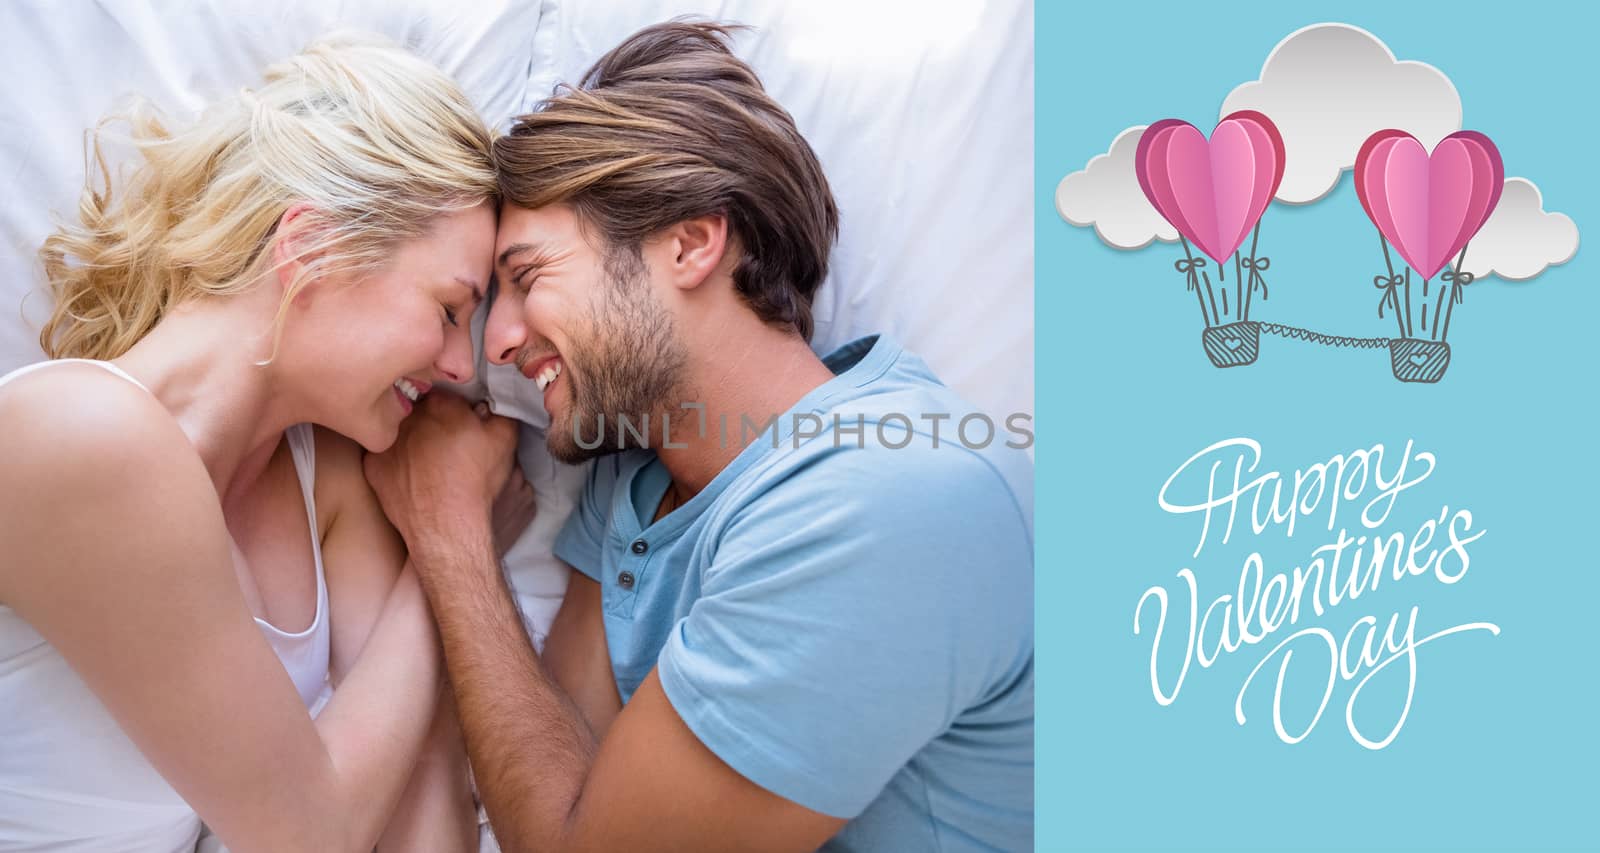 Composite image of cute couple relaxing on bed smiling at each other by Wavebreakmedia